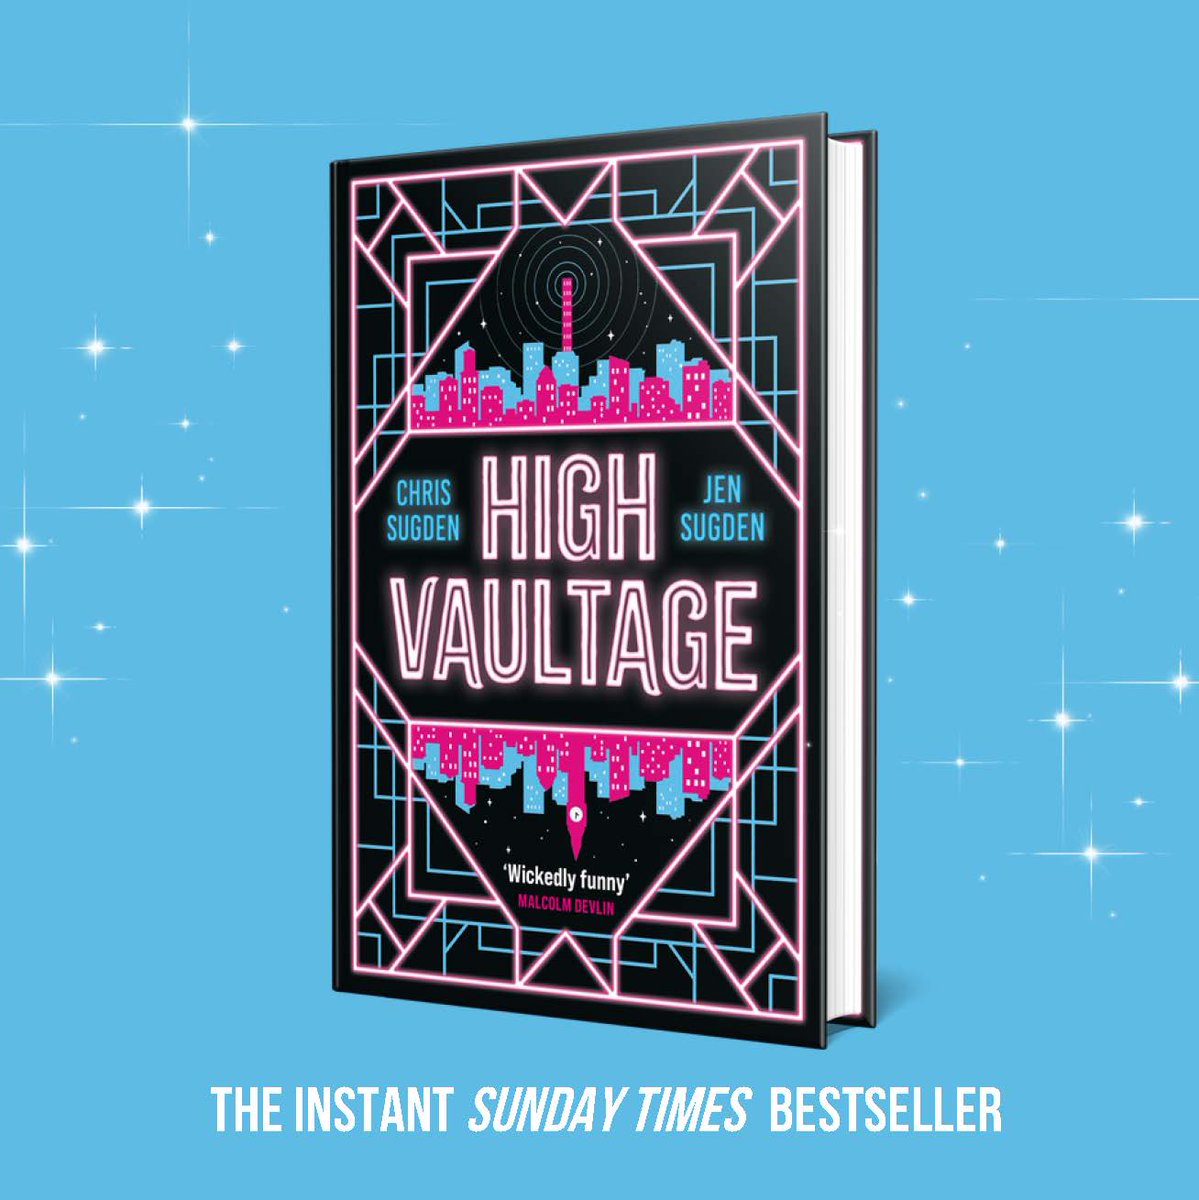 We are thrilled to announce that #HighVaultage by @chrssgdn and @JenSugden is an Instant Sunday Times Bestseller! ⚡ Dive into the chaos of Even Greater London, 1887: brnw.ch/21wI2wD